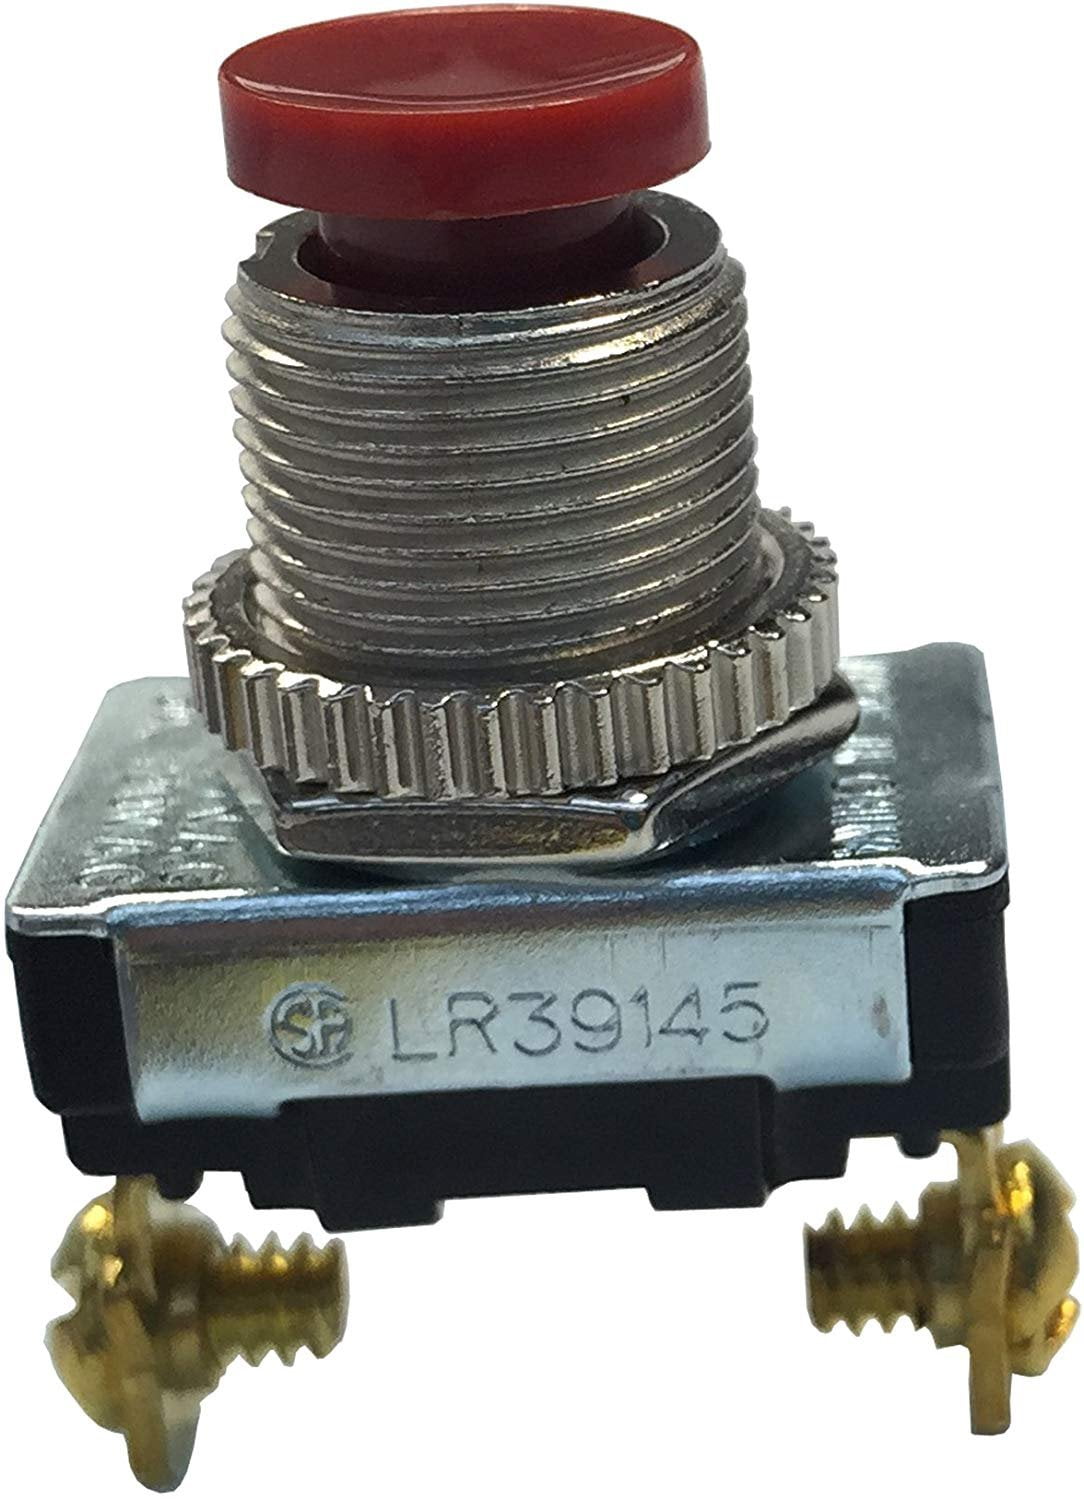 Gardner Bender GSW-24 Double Insulated Electrical Push Button Switch SPST ON-... 